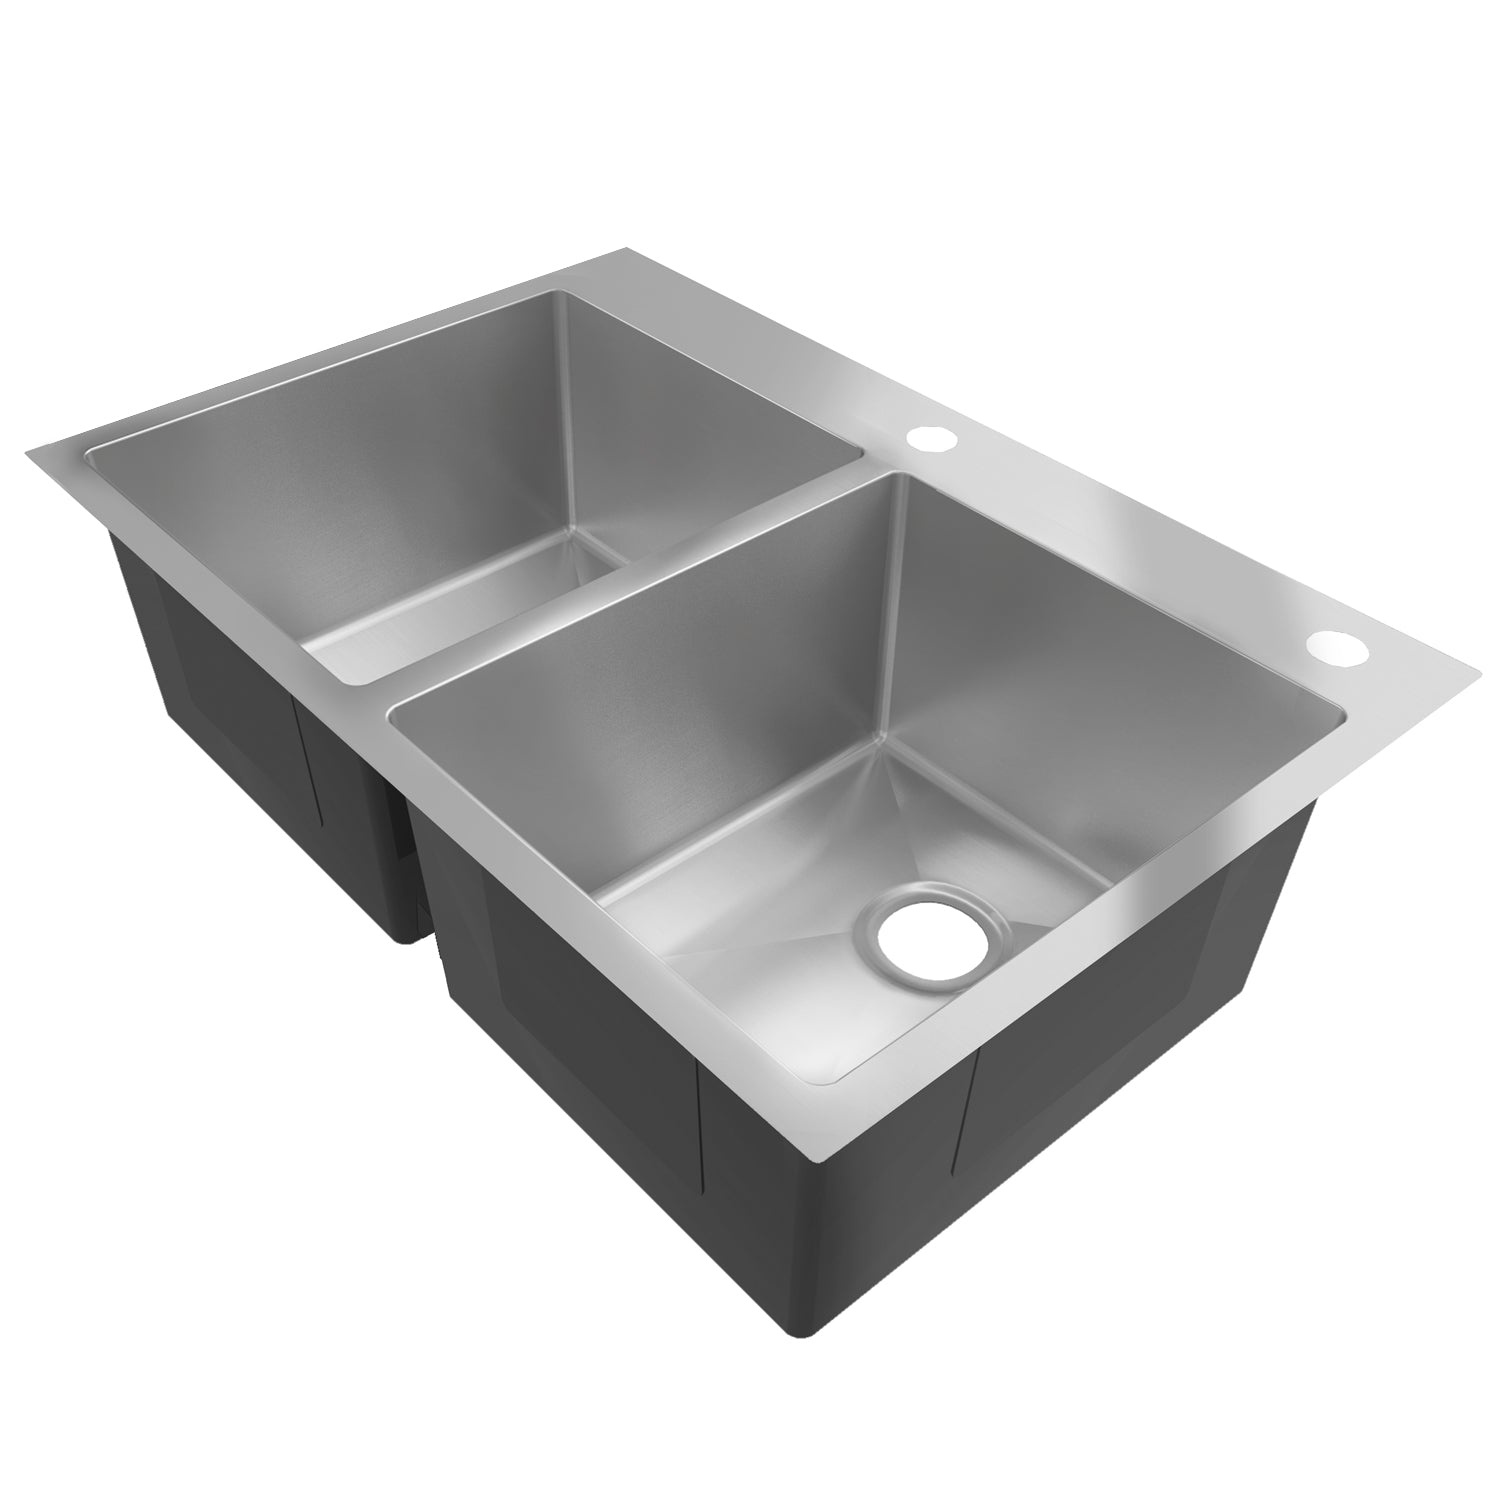 Sinber 33" x 22" x 9" Drop In Double Bowl Kitchen Sink with 18 Gauge 304 Stainless Steel Satin Finish HT3322D-S-9 (Sink Only)